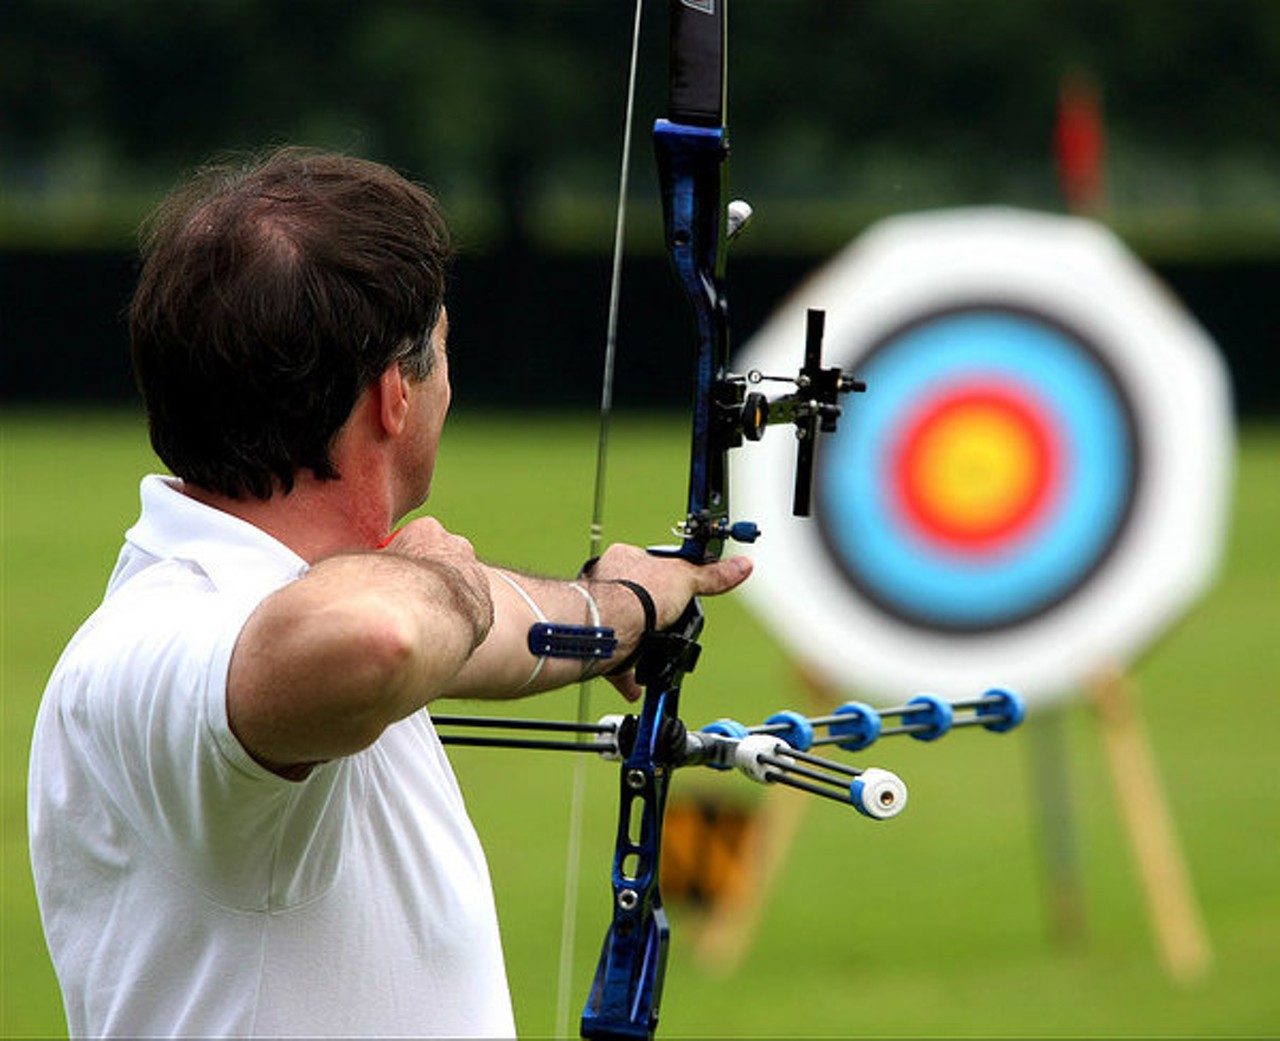 From there, it's just a quick trip to the Archery Hall of Fame and Museum in Springfield. Photo courtesy Flickr/Tony Bates